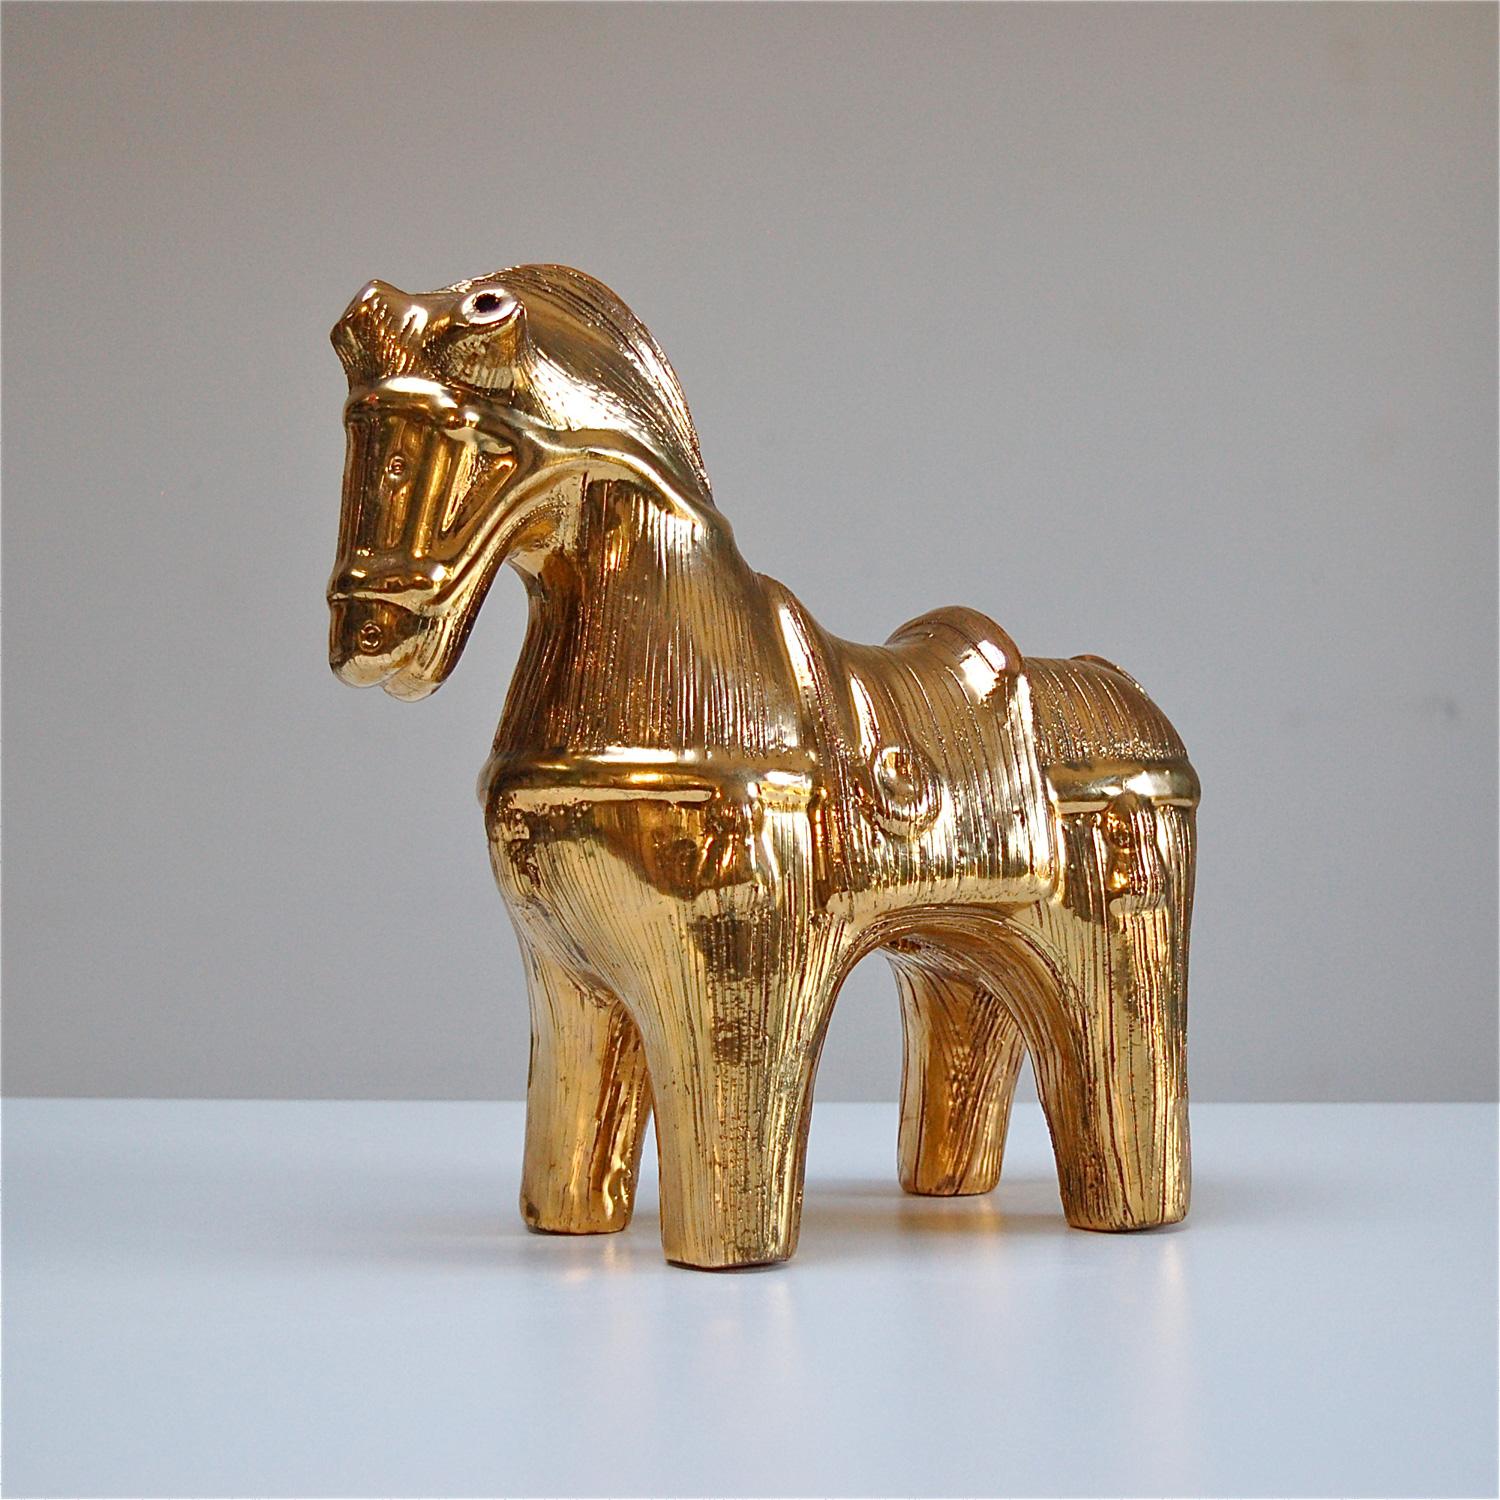 Bitossi ceramic horse sculpture or Cavallo designed by Aldo Londi. The gold enamel edition was produced approx between 1968 and 1973. The shimmering effect is achieved by mixing 24-karat gold leaf to the glaze. The metallic luster has had a third